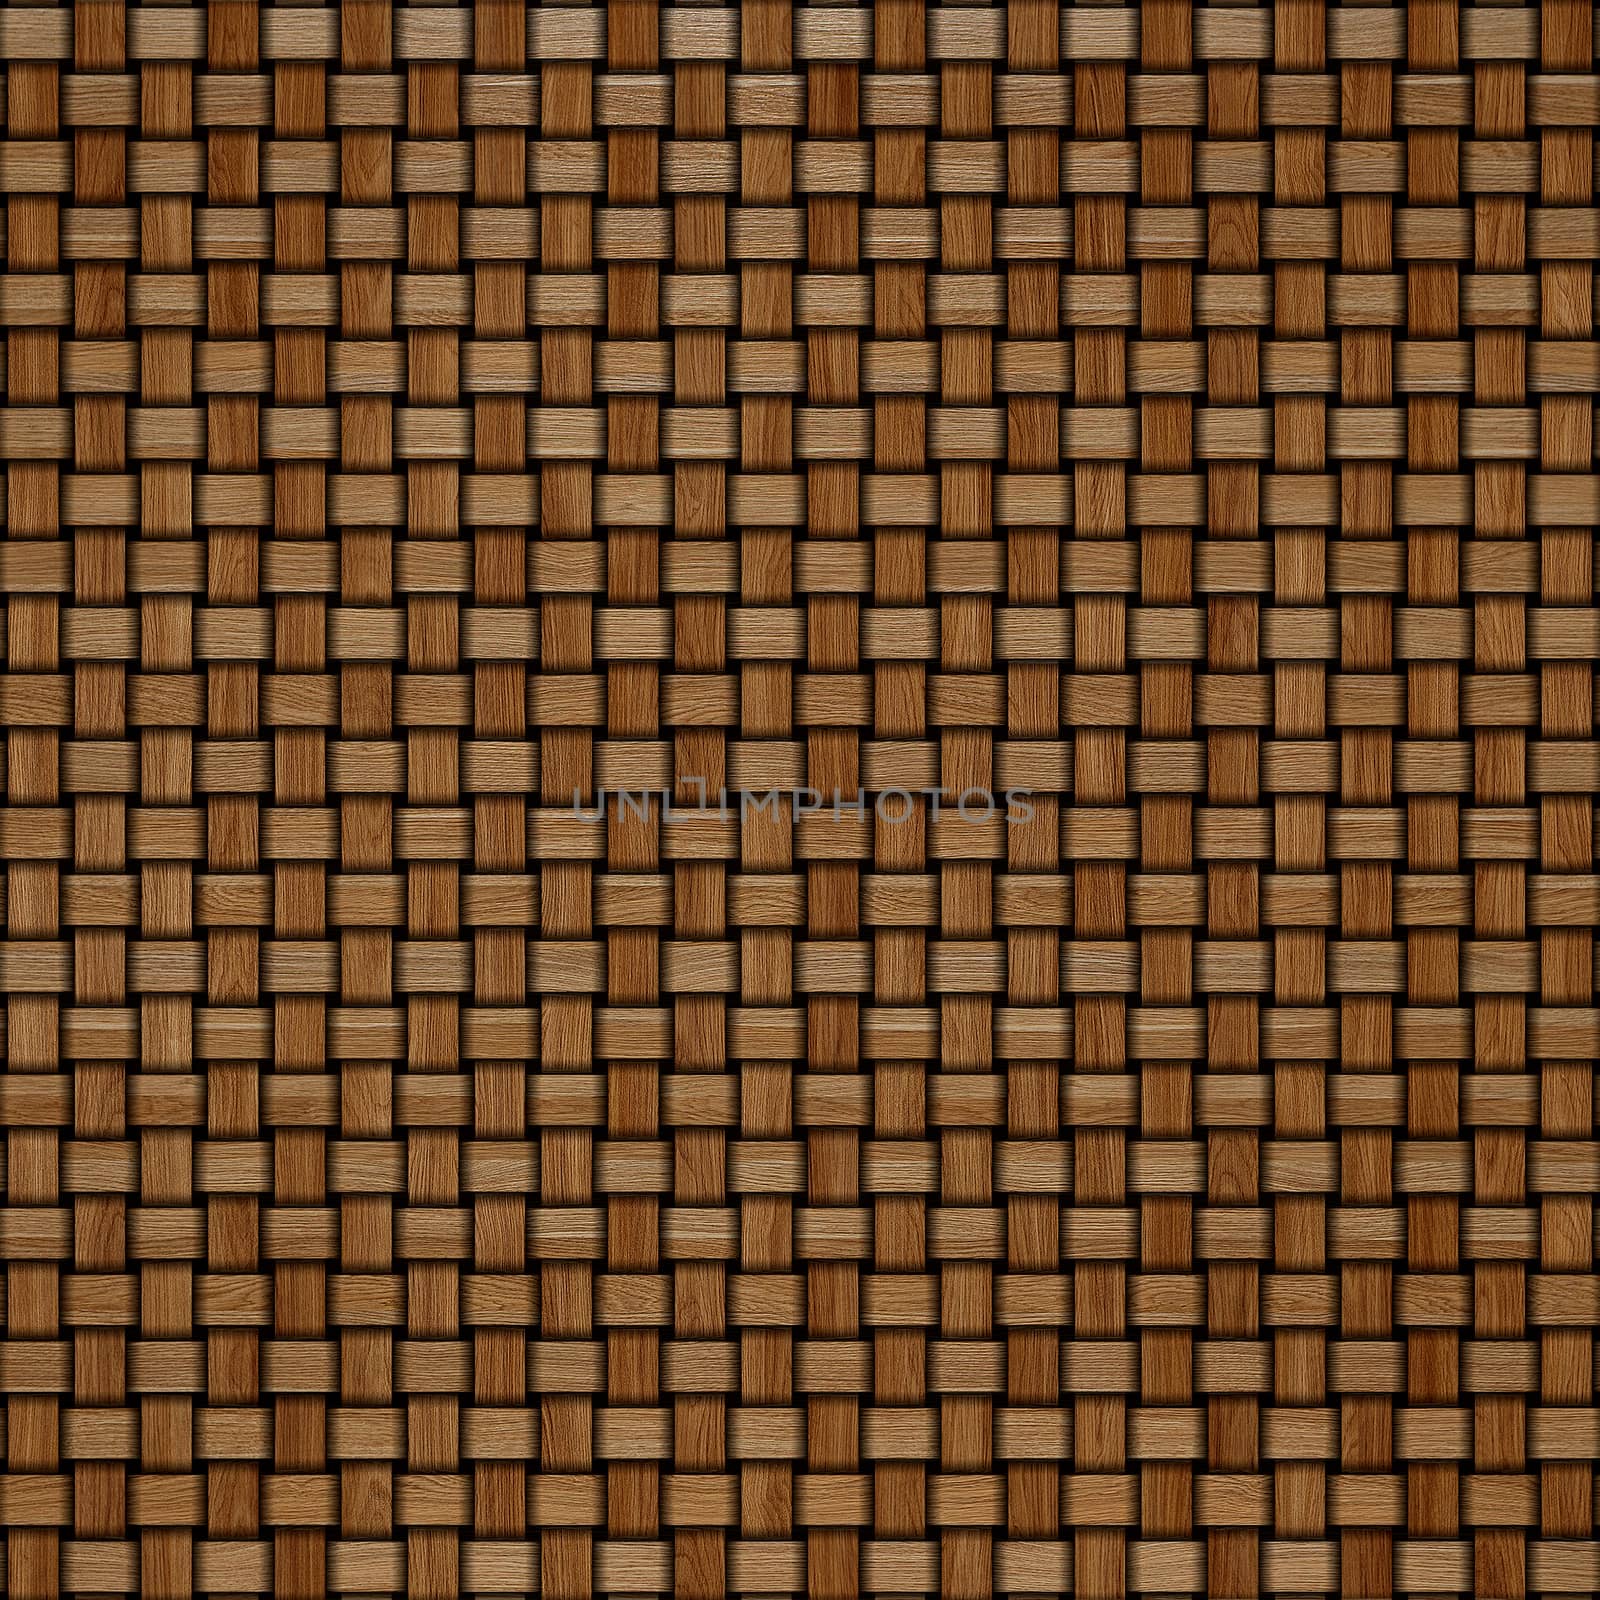 Wooden weave texture background. Abstract decorative wooden textured basket weaving background. Seamless pattern